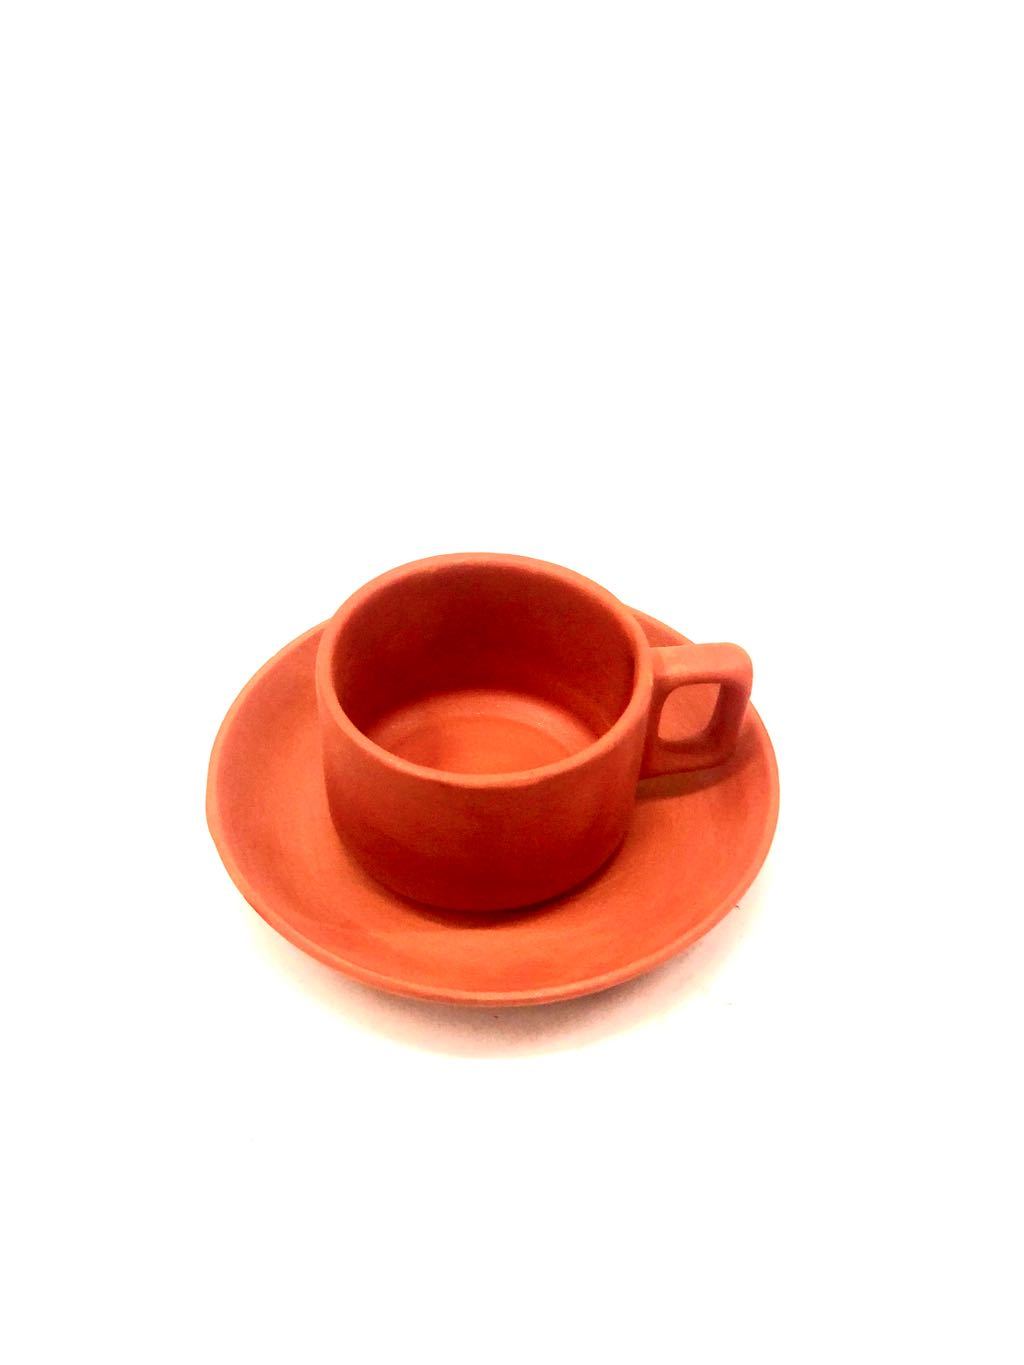 Terracotta Cup & Saucer Pack Of 6 Great For Tea/Coffee Use Tamrapatra - Tamrapatra